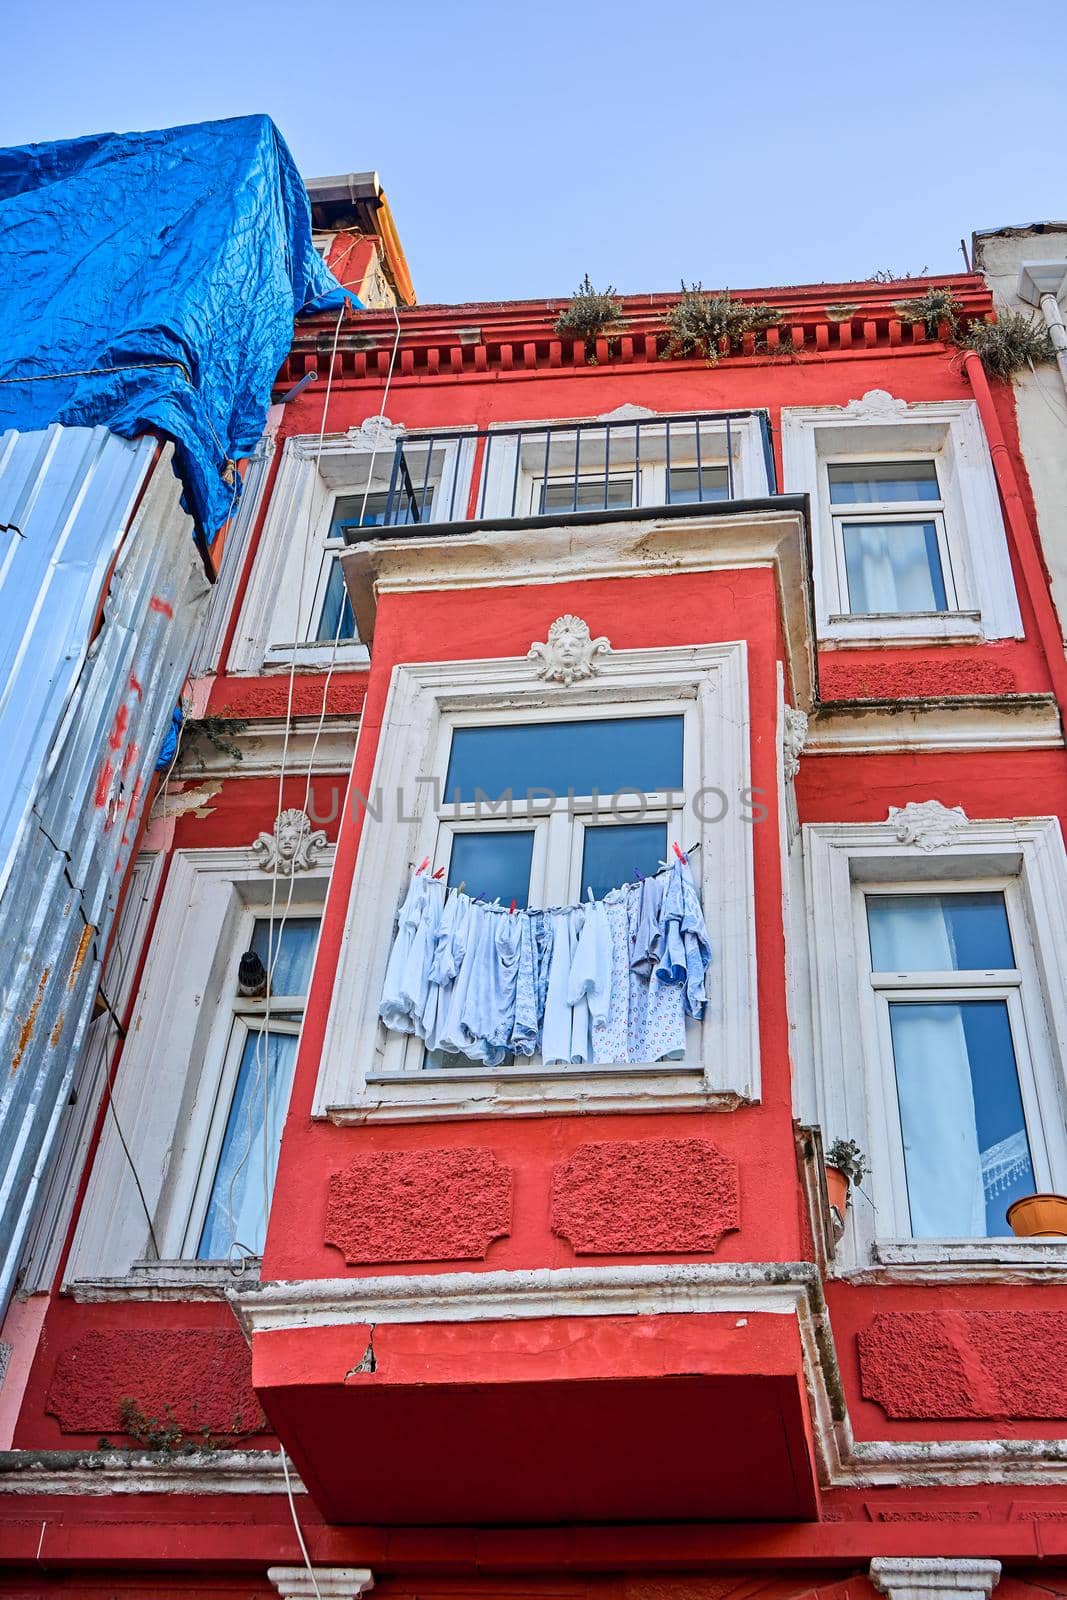 Usual life. The multicolored clothes dry on the rope. A picturesque old district in Istanbul. Low rise colorful houses and narrow cozy streets.